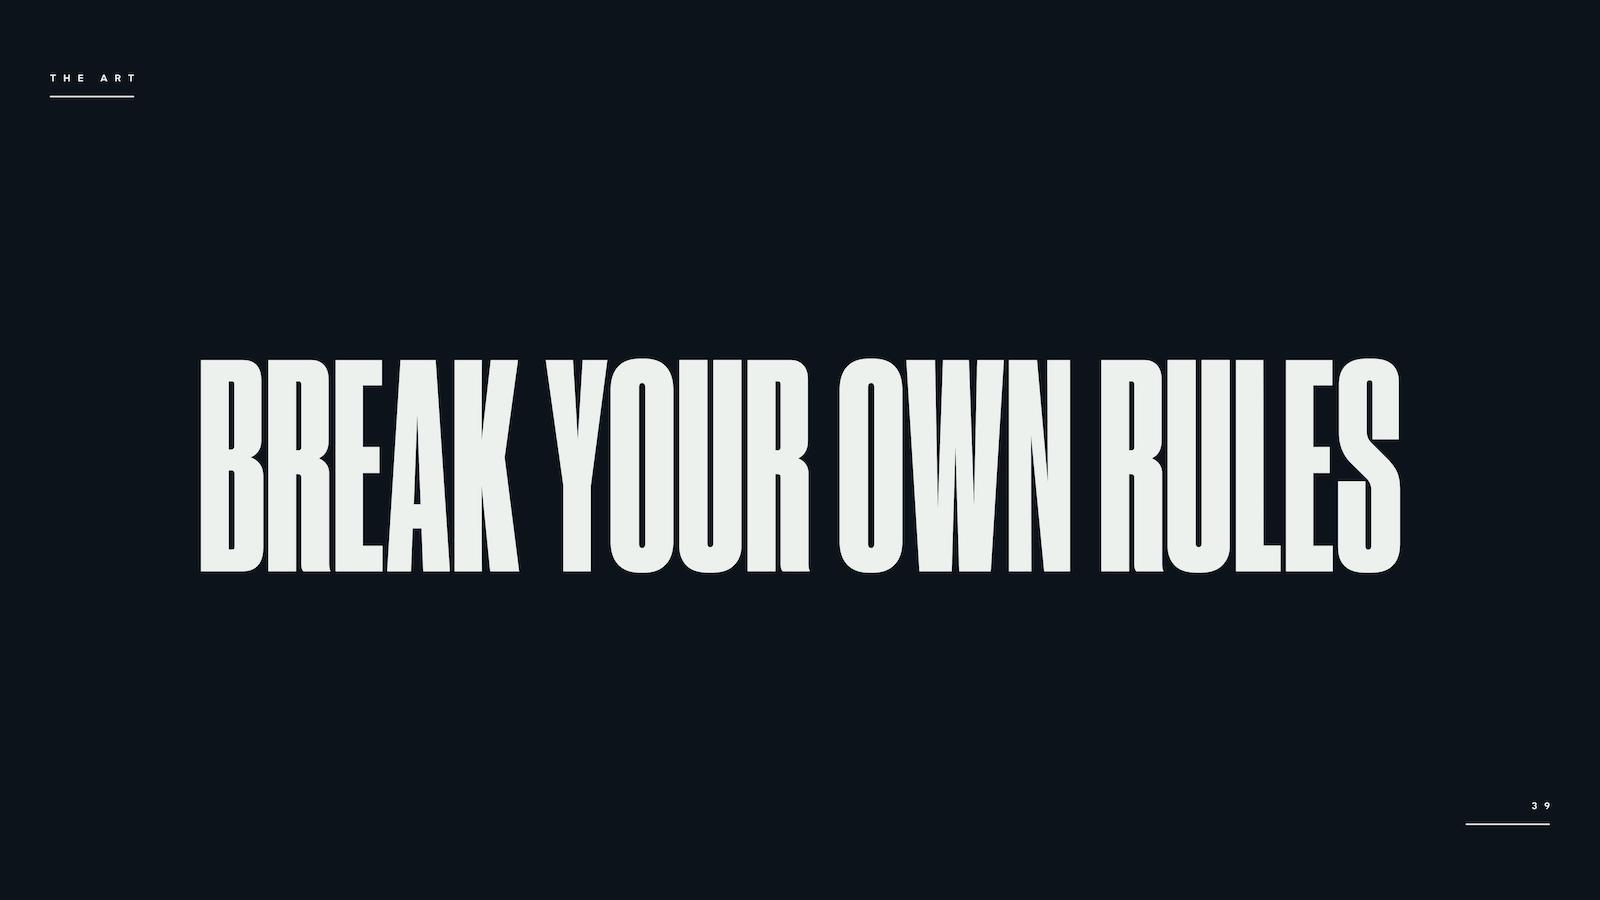 BREAK YOUR OWN RULES